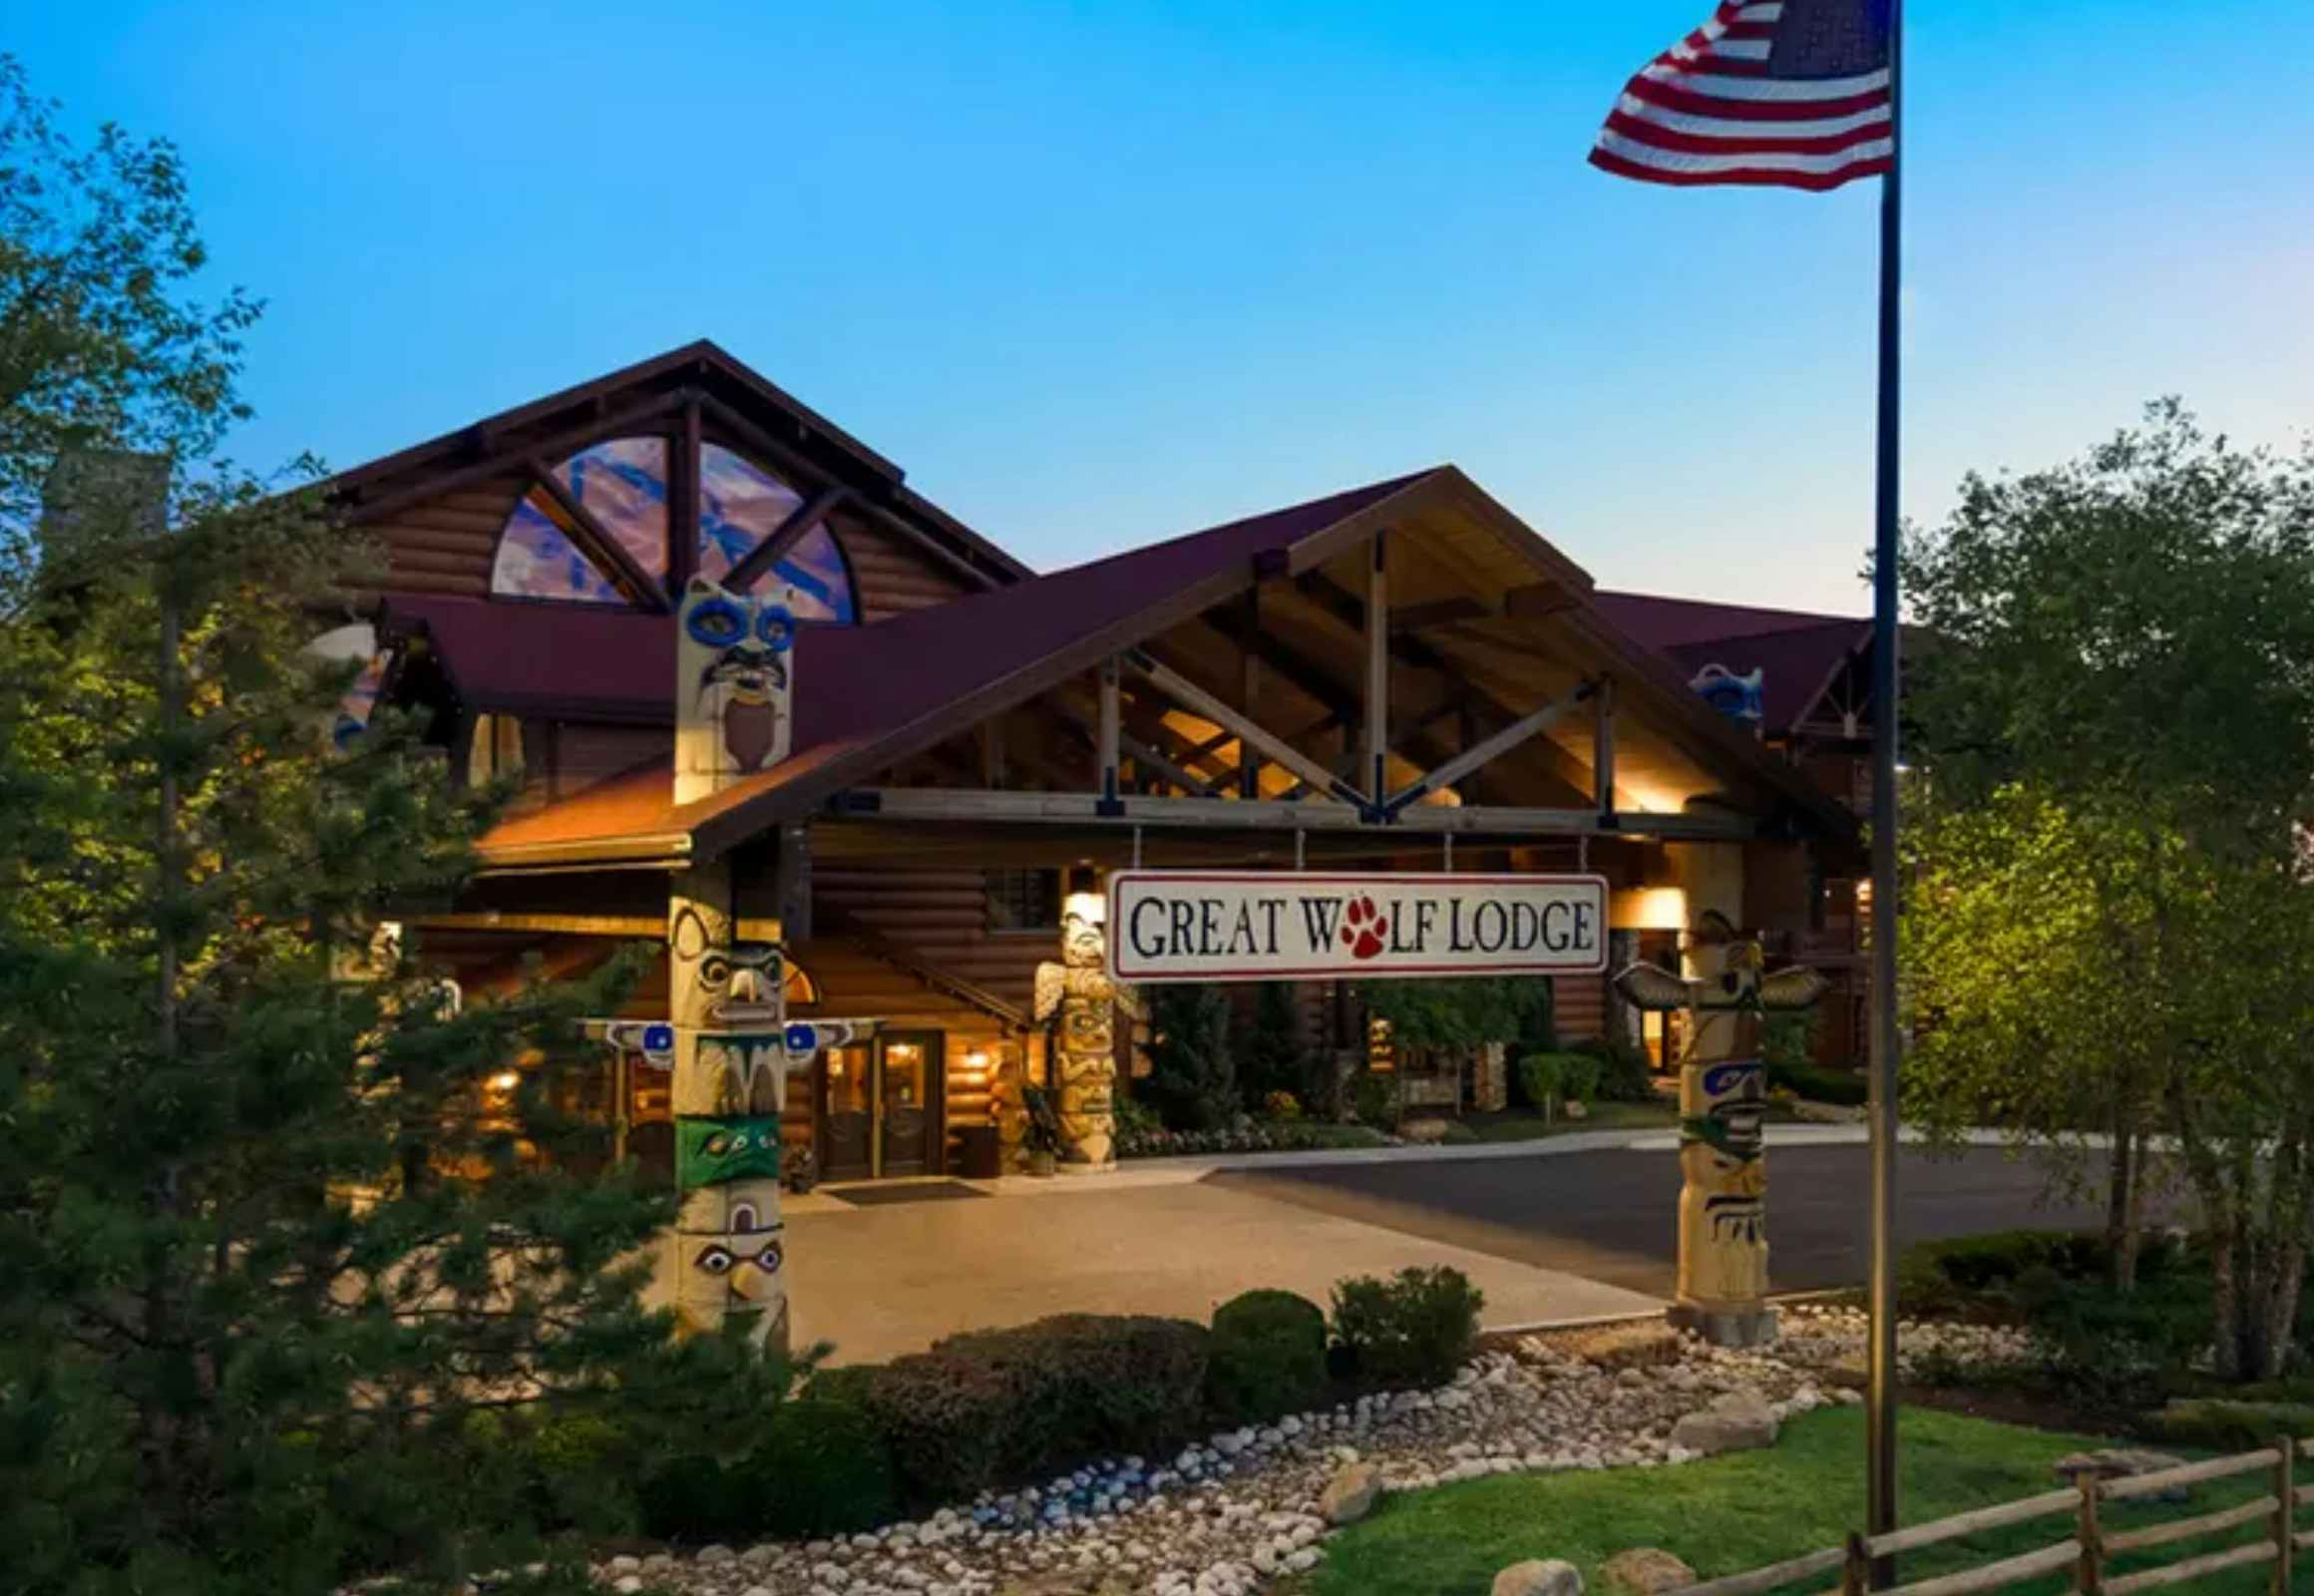 Stay at Great Wolf Lodge — As Low as $89 per Night at Groupon